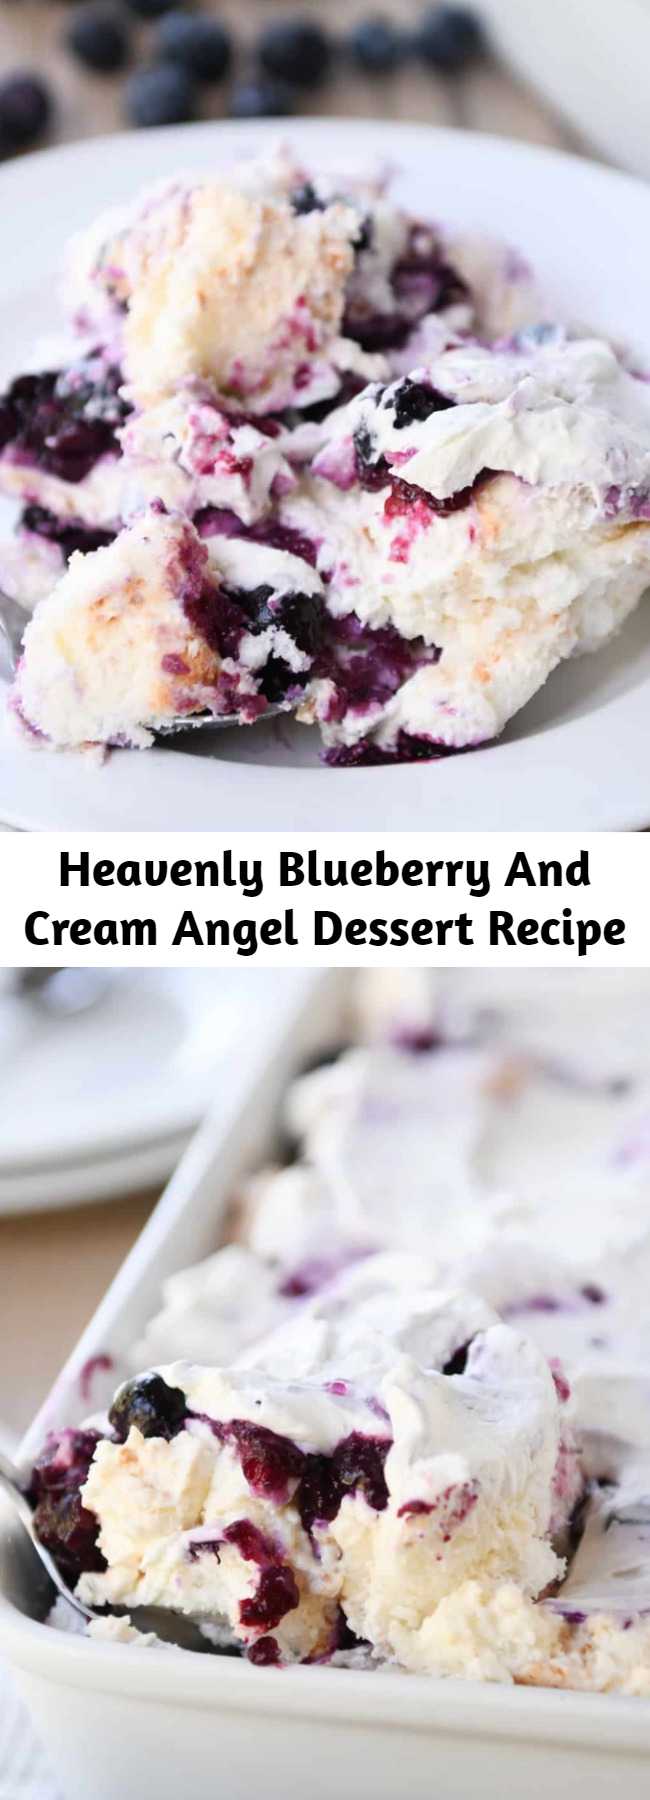 Heavenly Blueberry And Cream Angel Dessert Recipe - This heavenly blueberry angel food cake dessert is so light and delicious! So simple to prepare, it is the perfect ending to any meal. It's hard to describe how heavenly this dessert really is. It makes the perfect ending to any meal – everyone always asks for the recipe!